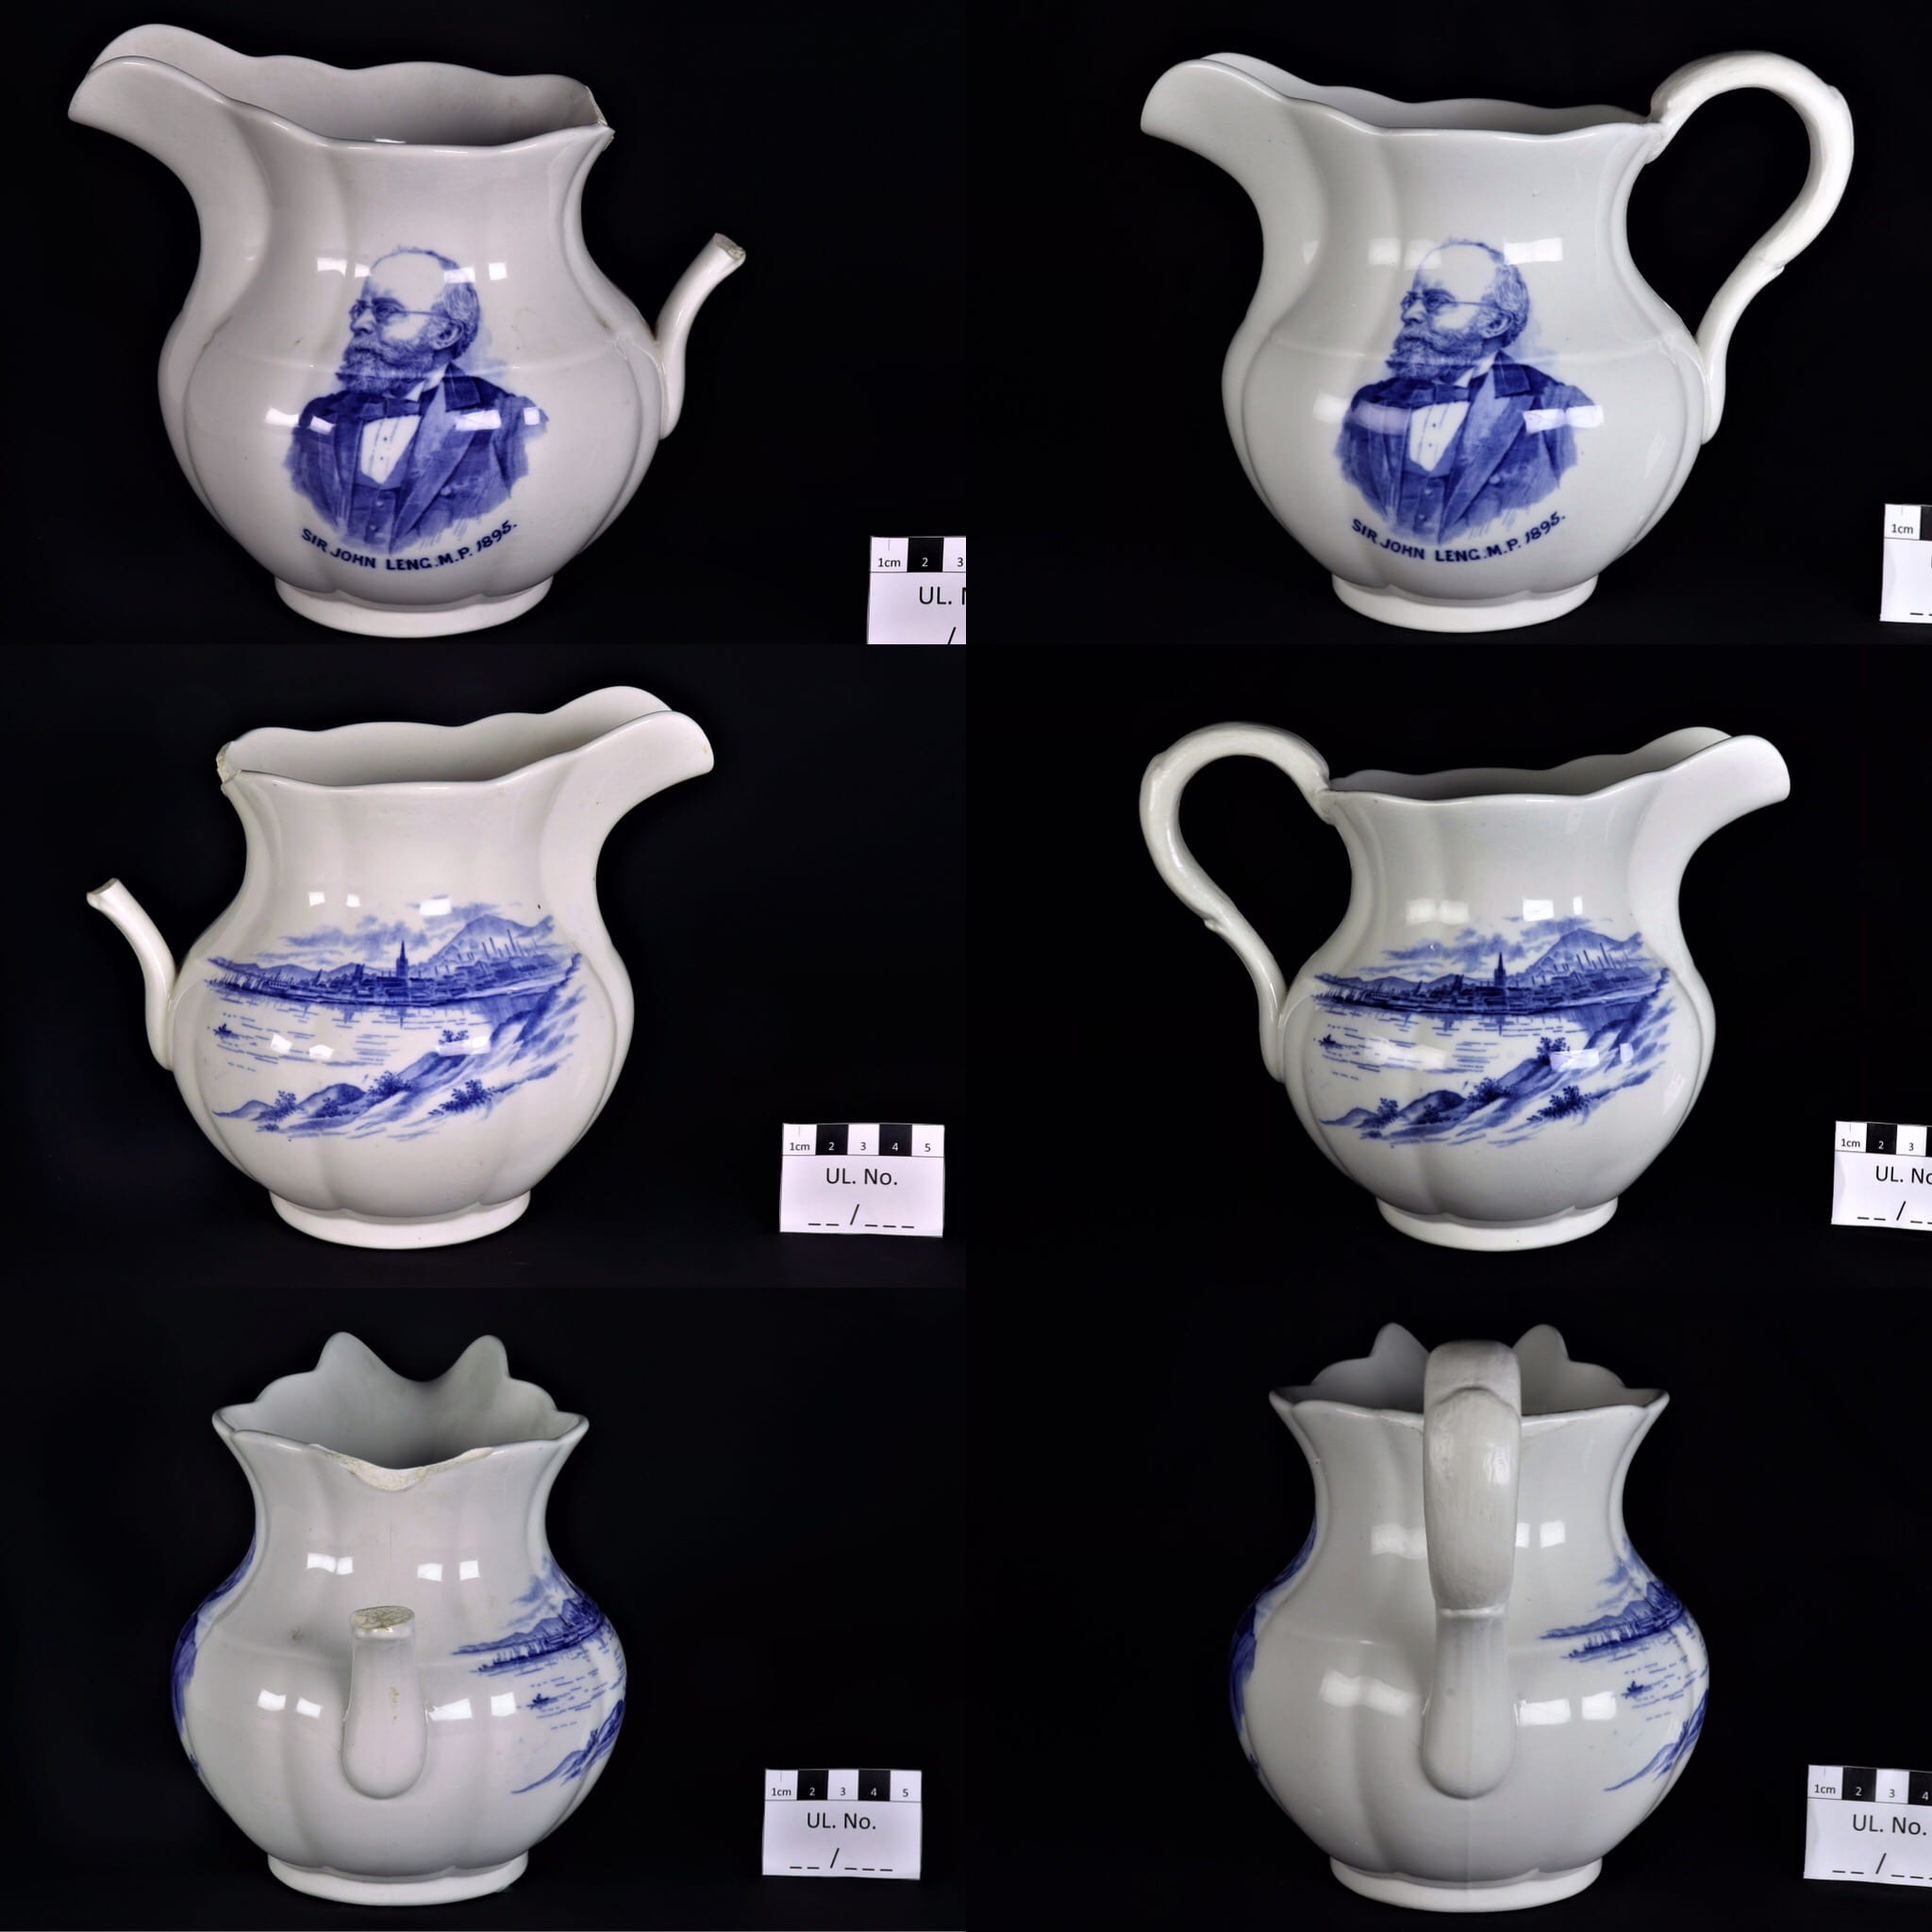 To the left, a white earthenware jug with a broken handle. To the right, the same jug with the handle restored.